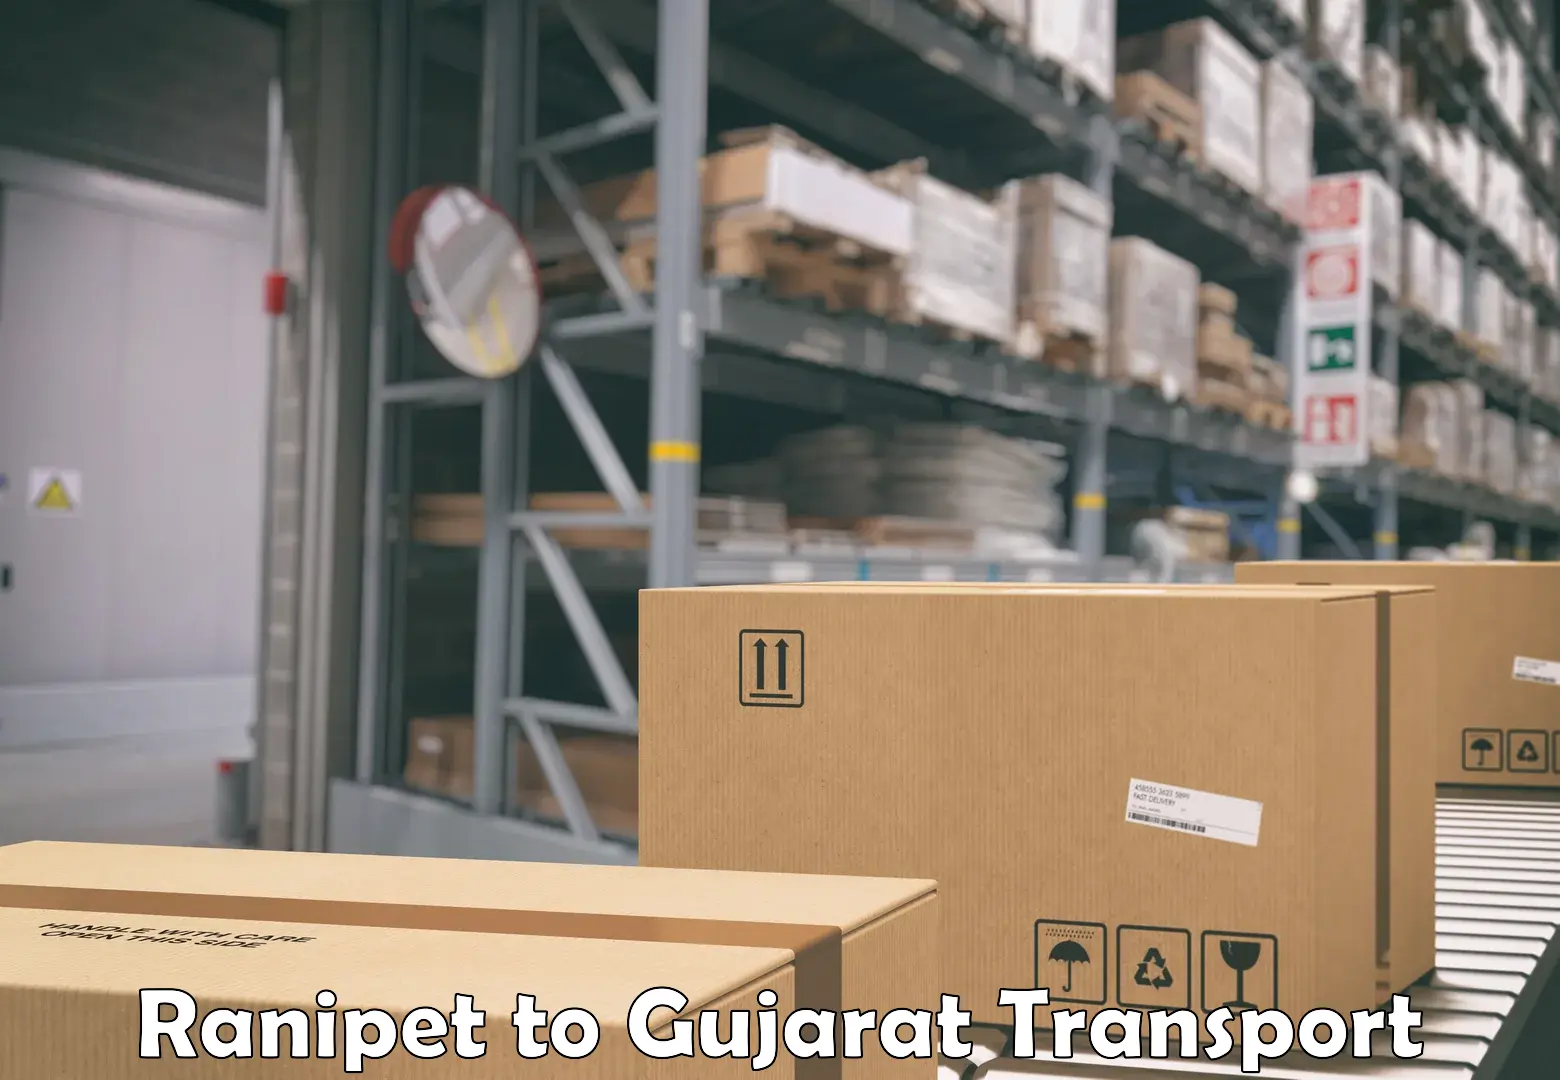 Road transport online services Ranipet to GIDC